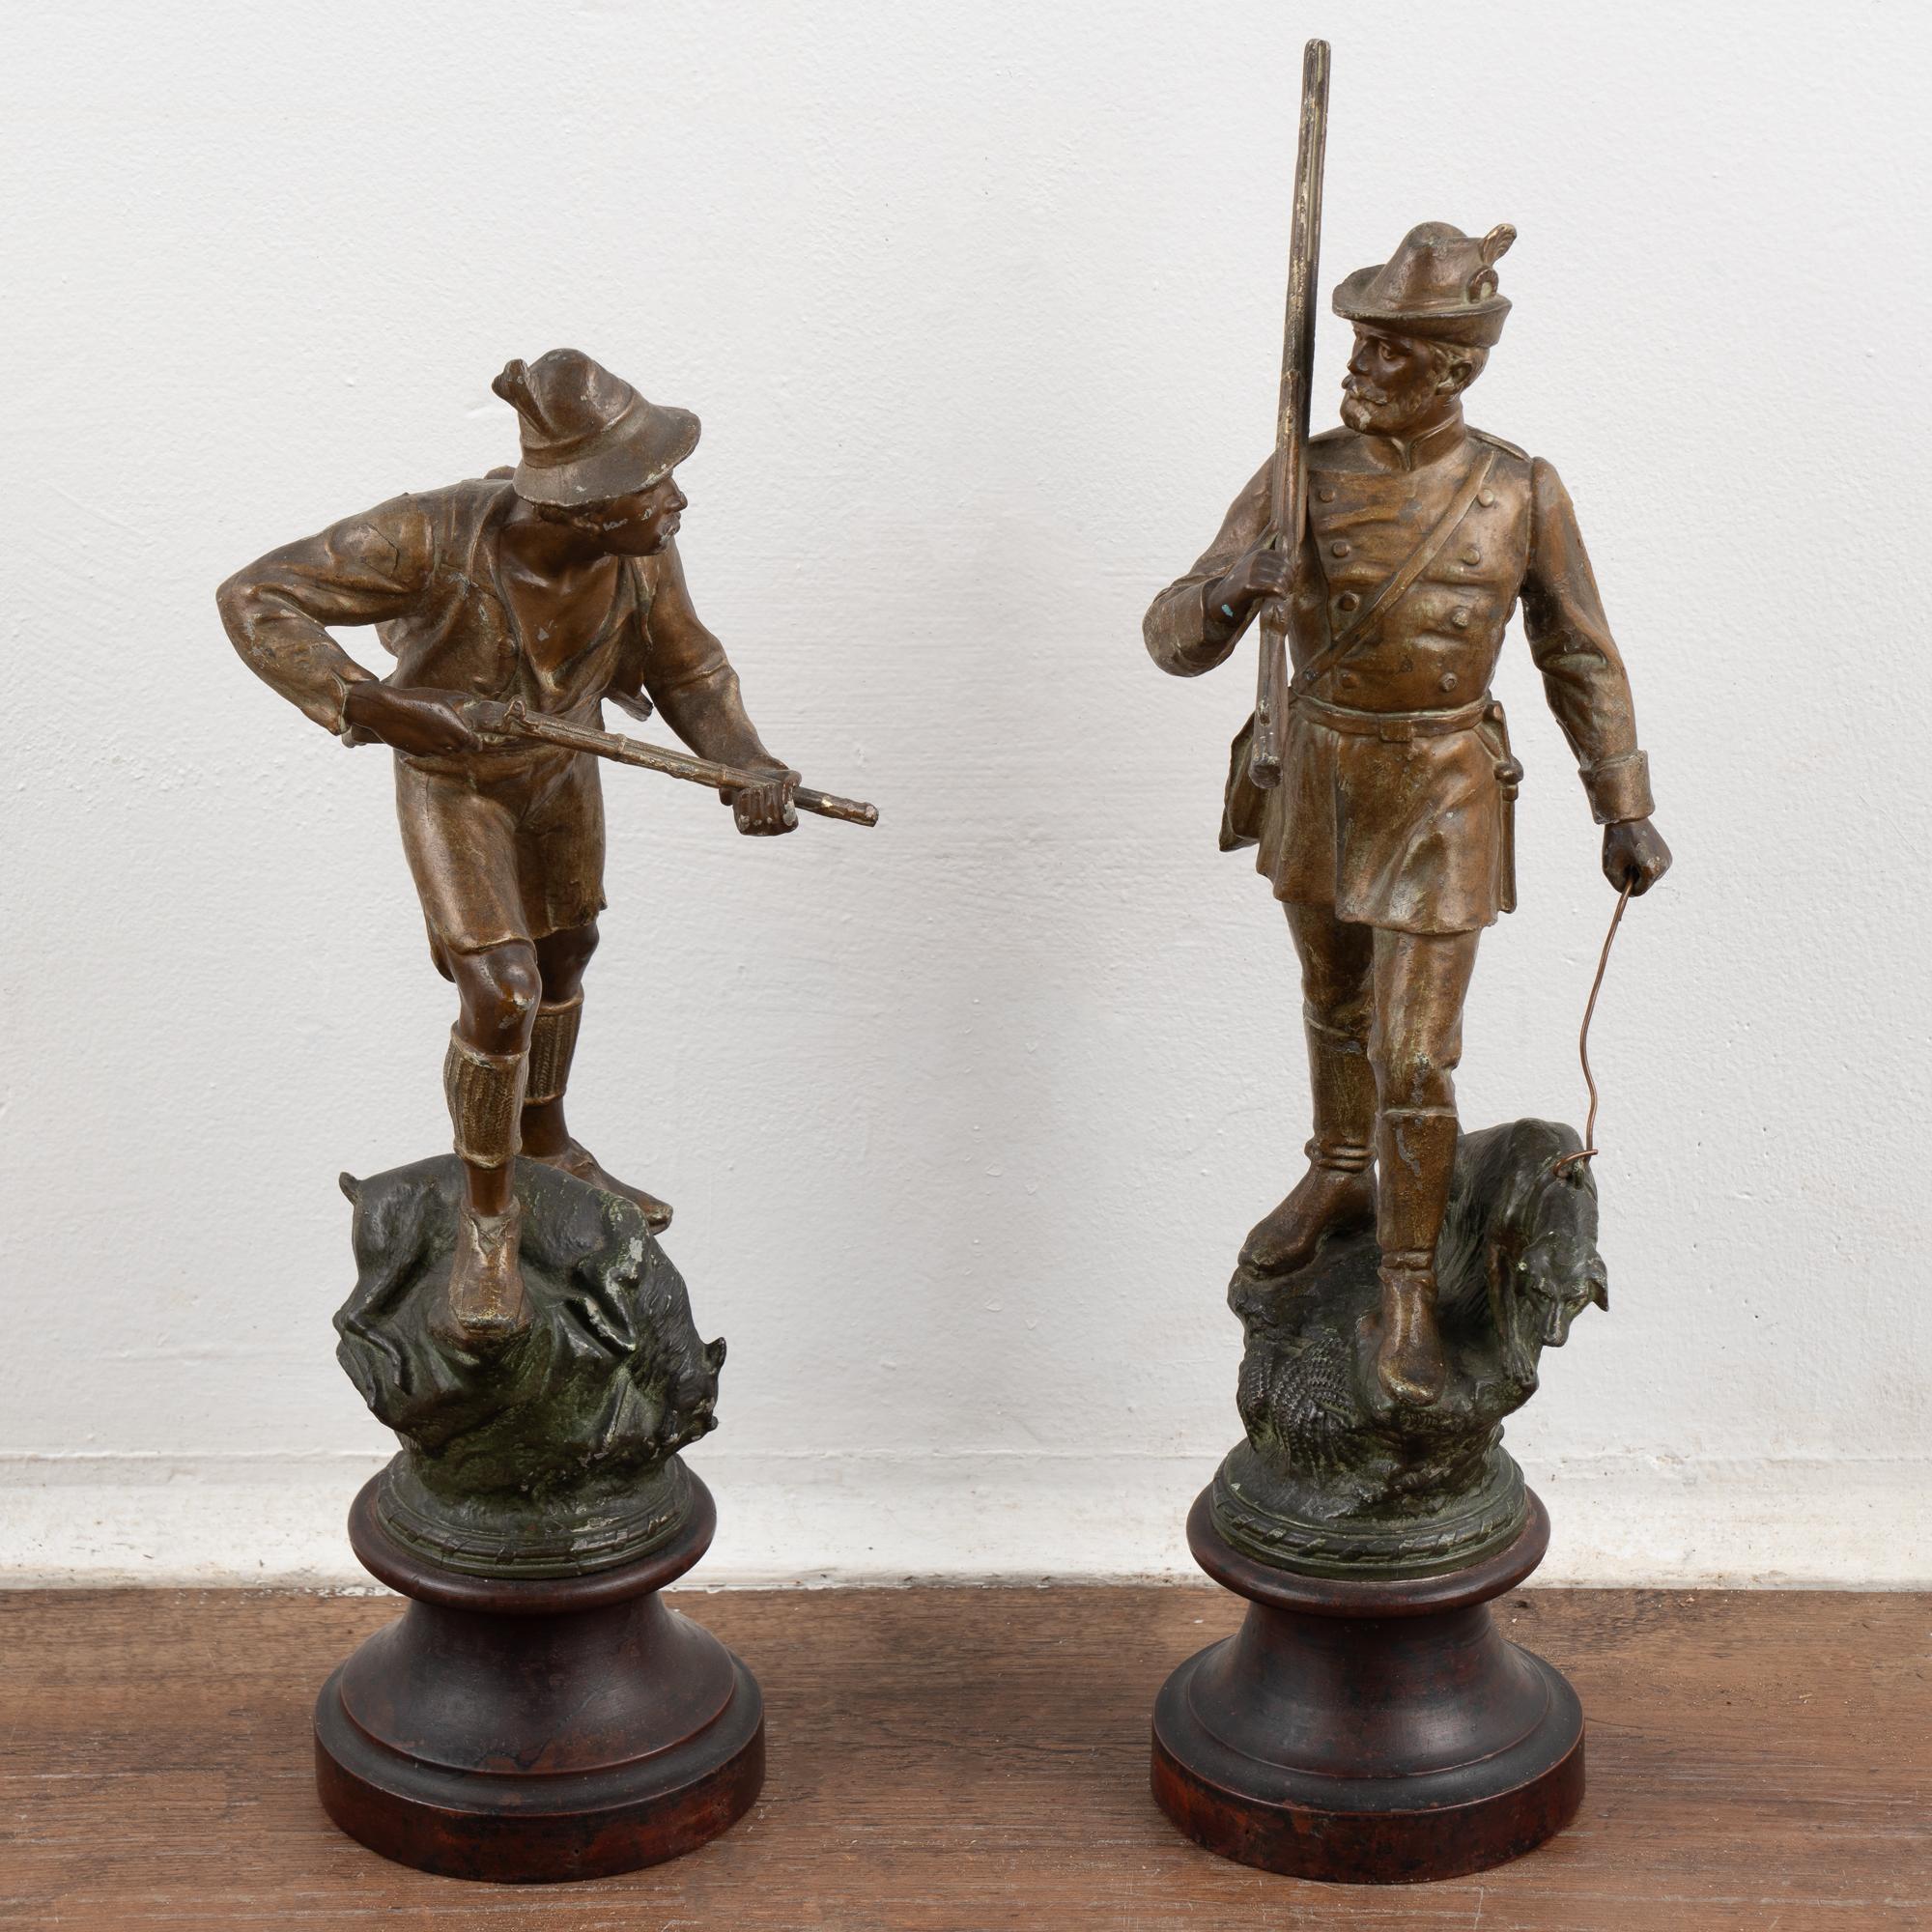 Pair of sculptures of two hunters in the field. The gentleman hunter has rifle and dog on leash while his country assistant has rifle and what appears to be a deer at his feet.
Bronze finish shows age related wear including tarnish, small nicks,